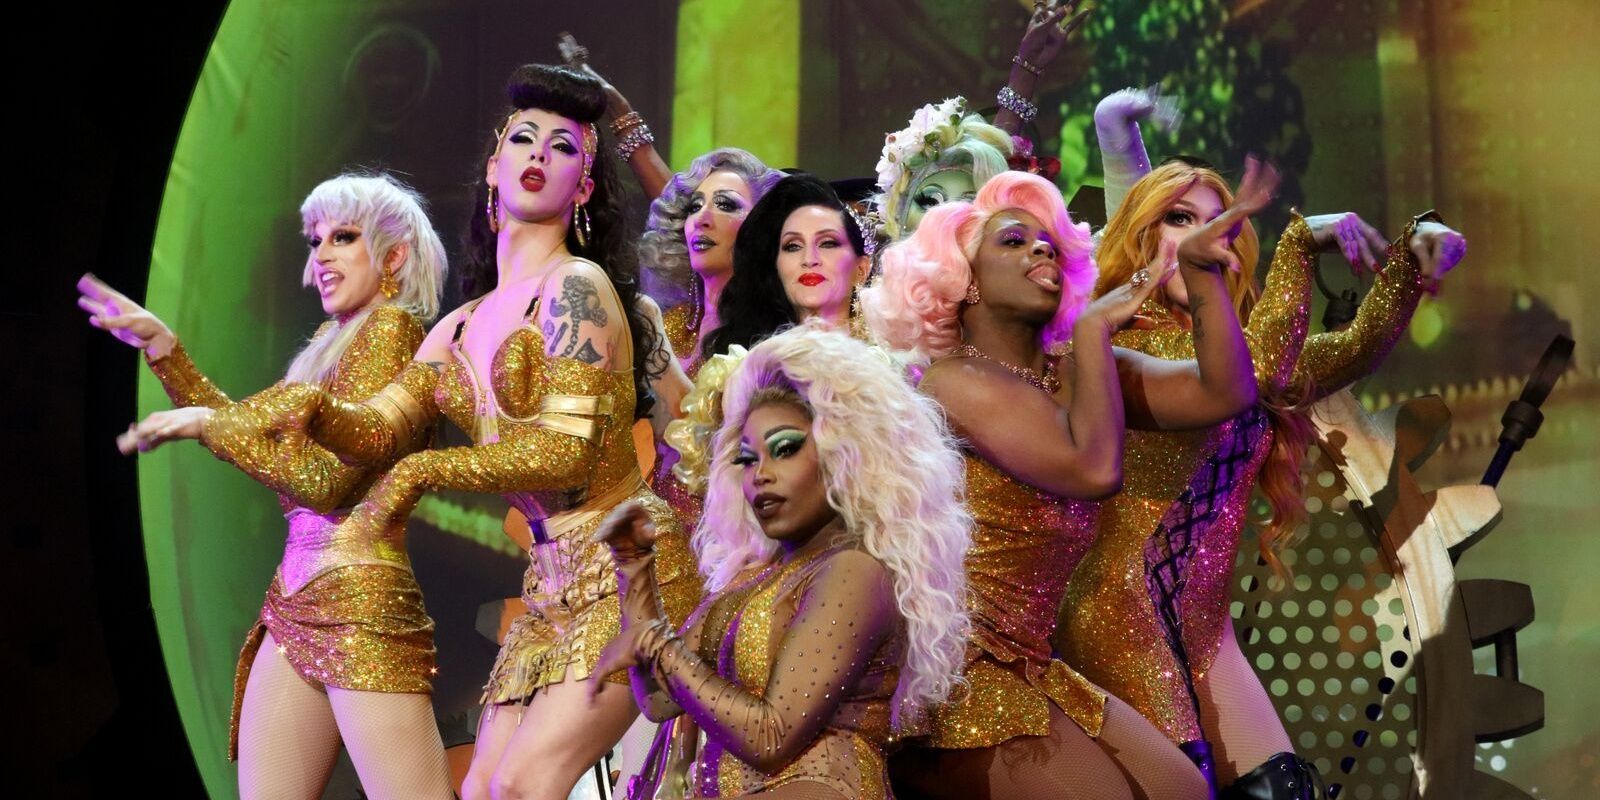 Michelle Visage on stage appears on stage surrounded by a gaggle of drag queens